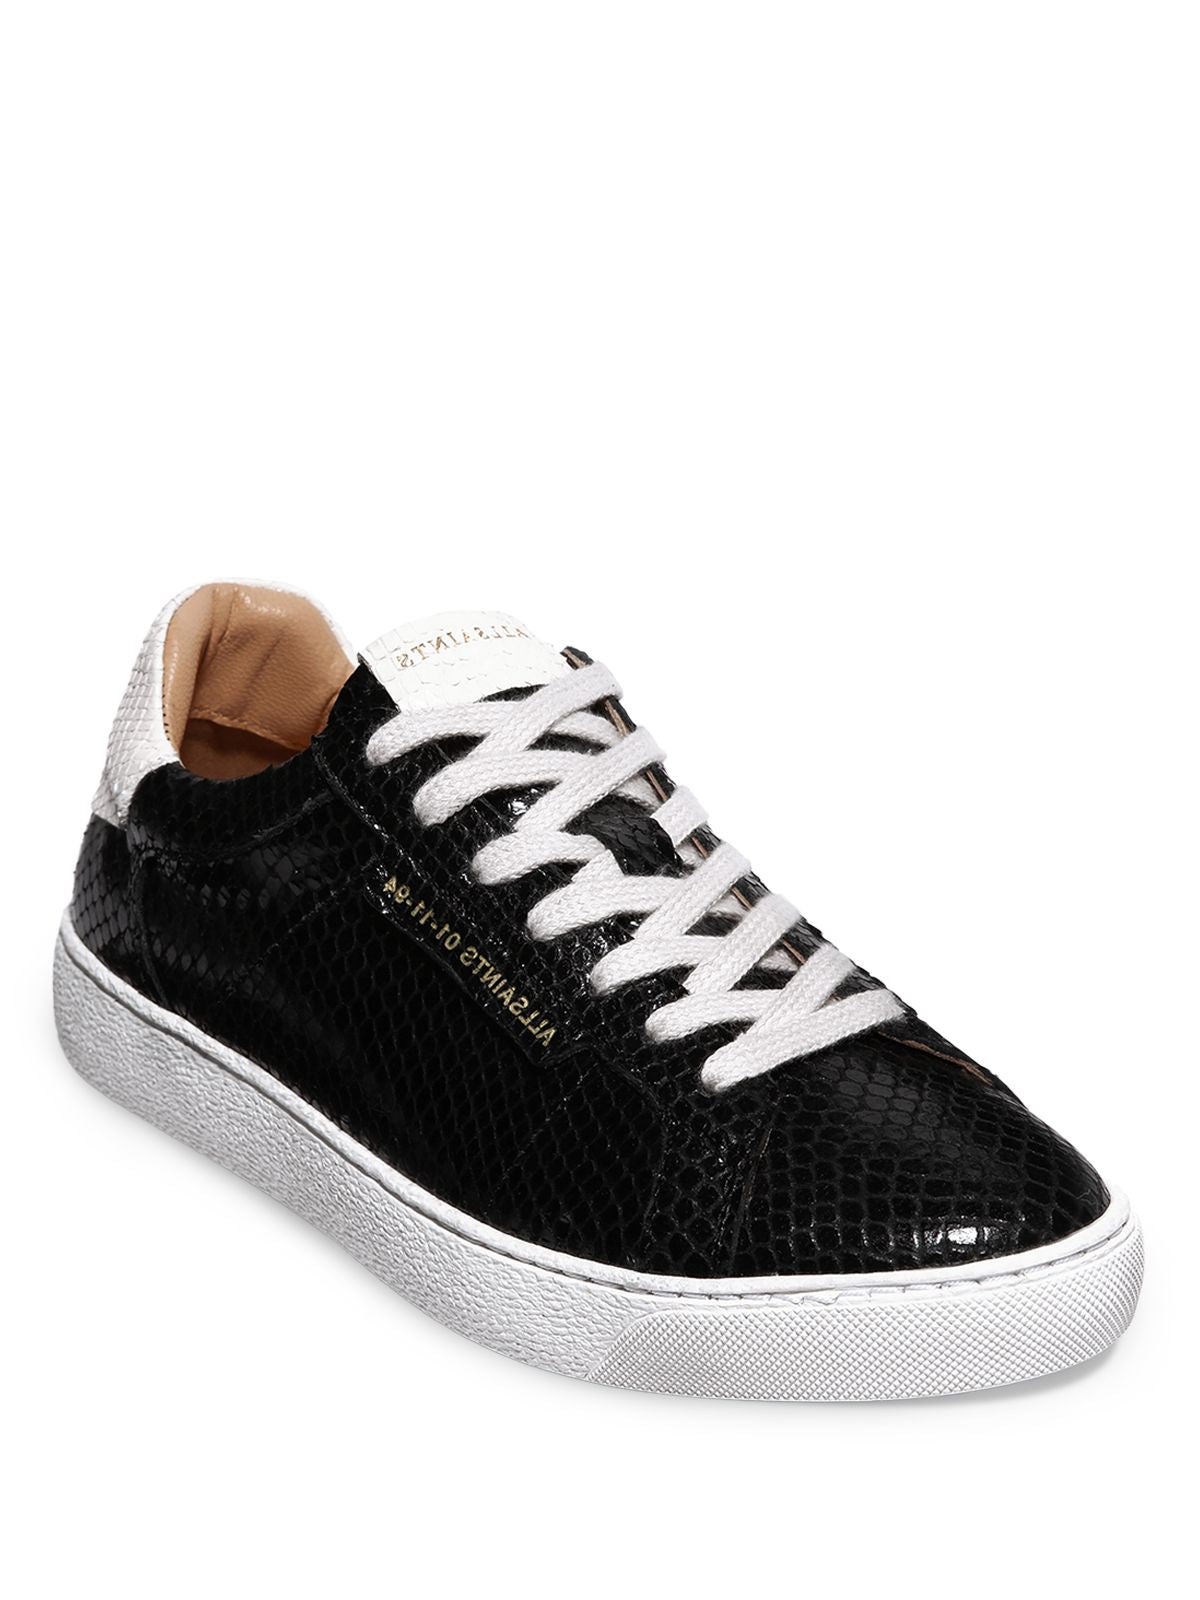 ALLSAINTS Womens Black Snakeskin 1/2" Platform Removable Insole Comfort Sheer Round Toe Wedge Lace-Up Leather Athletic Sneakers Shoes 38